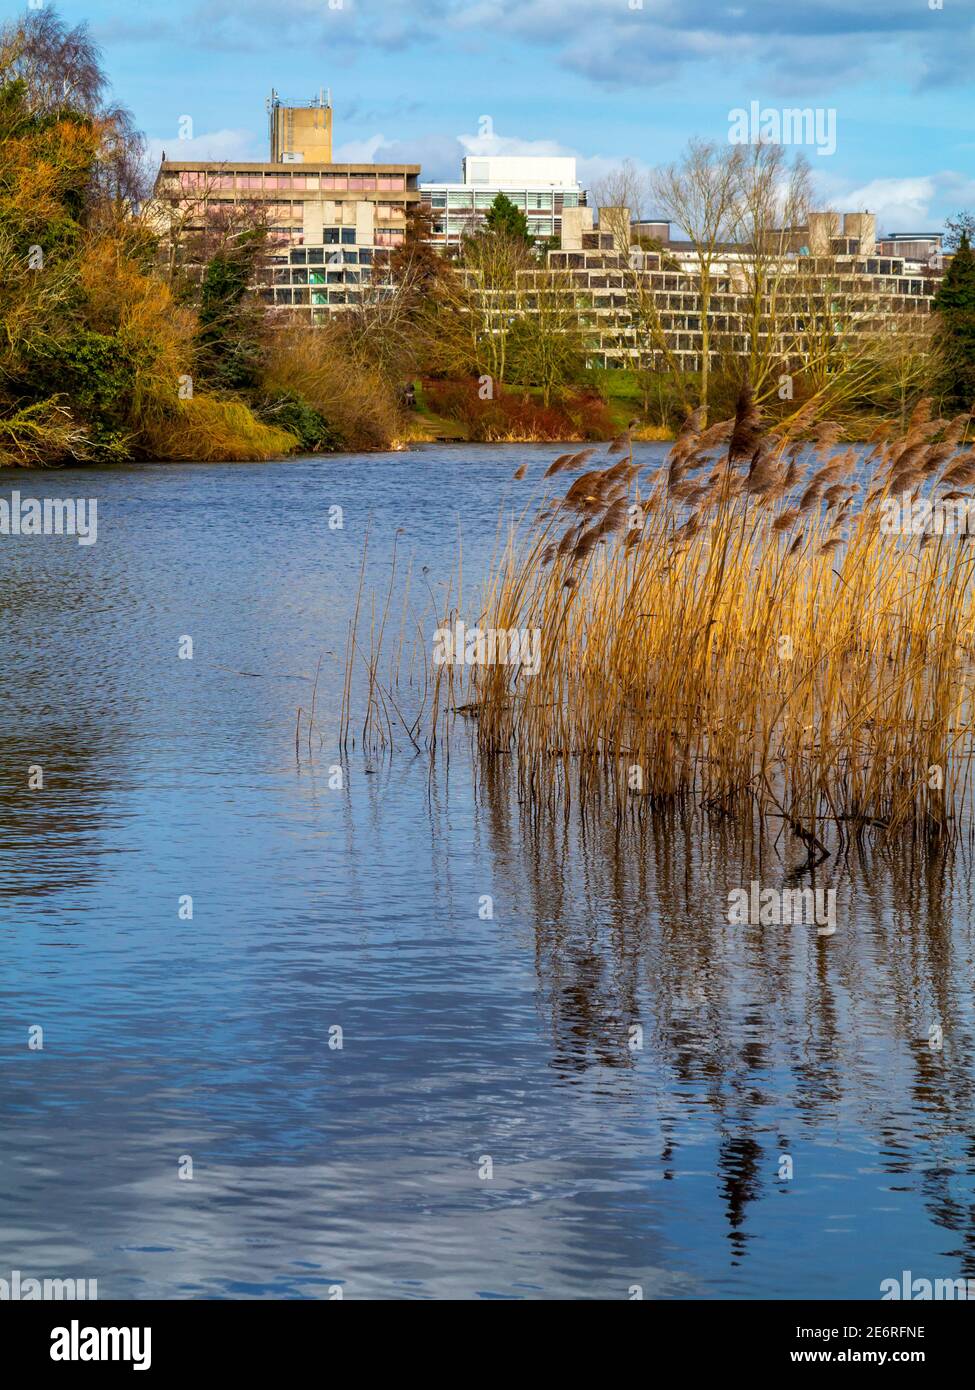 The University of East Anglia campus in Norwich England UK designed by Denys Lasdun and built from 1962 to 1968 with lake and reeds in foreground. Stock Photo